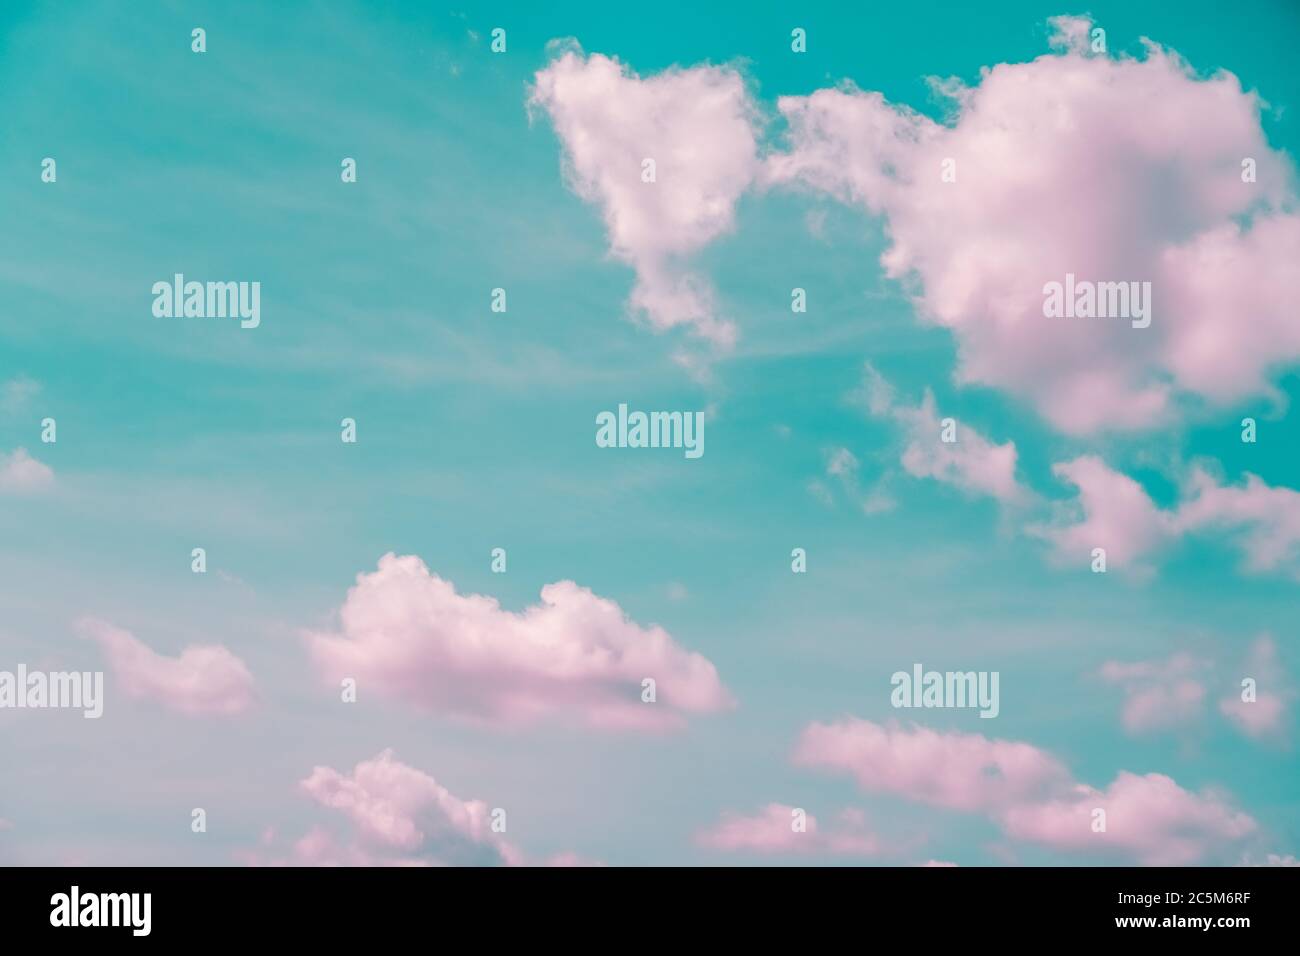 Copy space summer blue sky and white pink pastel hilight cloud abstract minimal background. Stock Photo